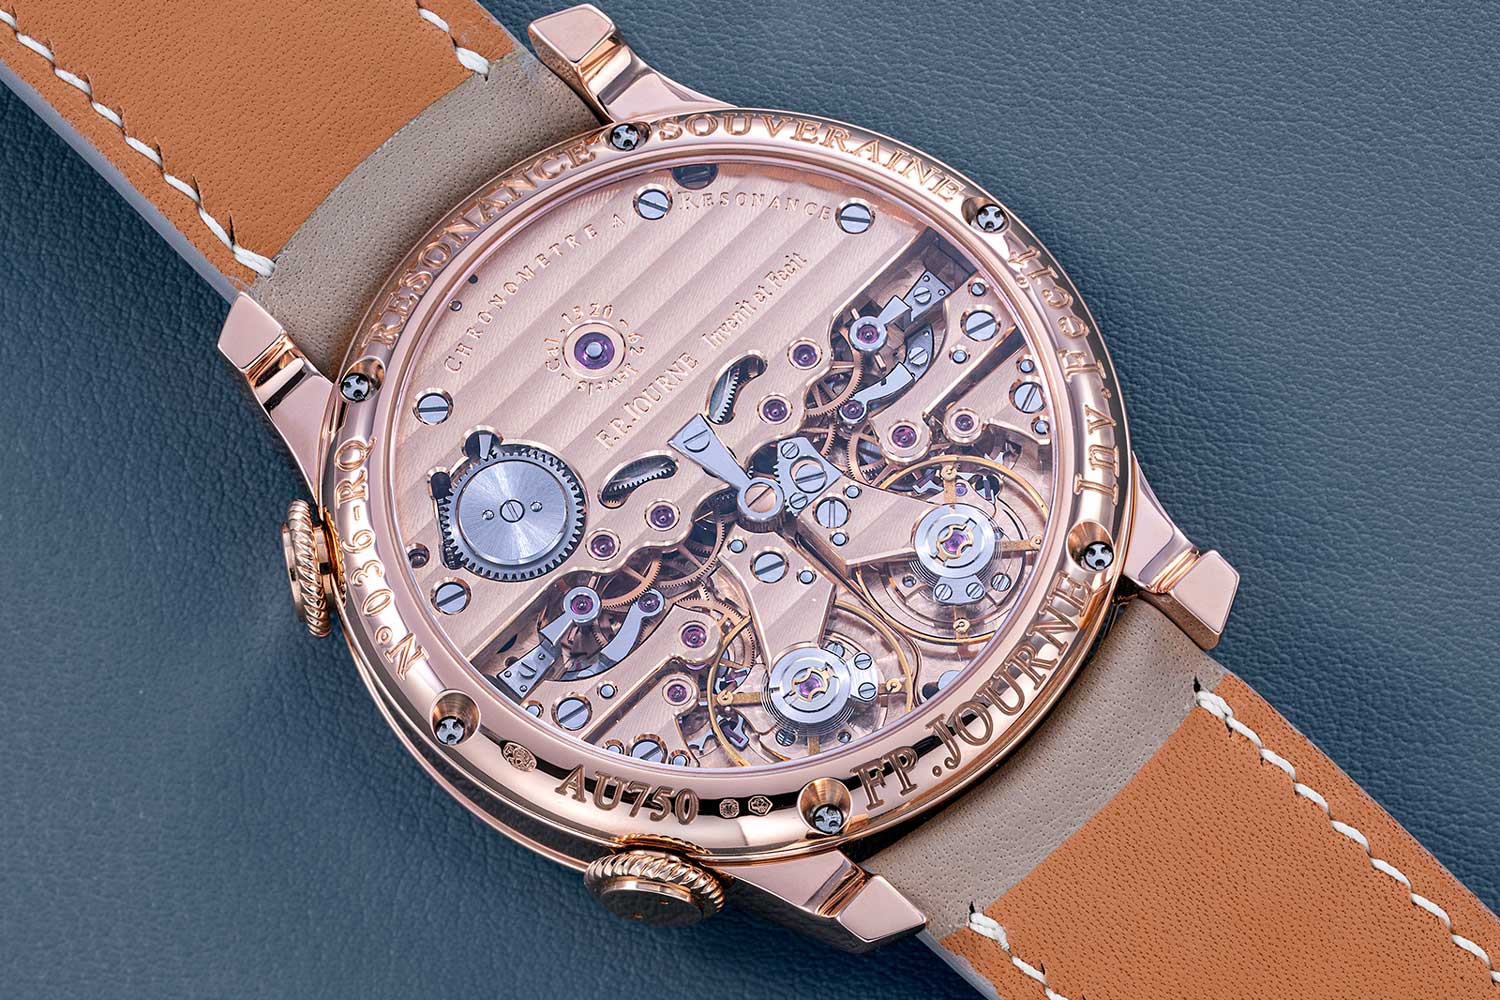 The new Chronomètre à Résonance incorporates a differential that splits power from a single barrel to two separate geartrains, each equipped with a remontoir (Image: The Hour Glass)